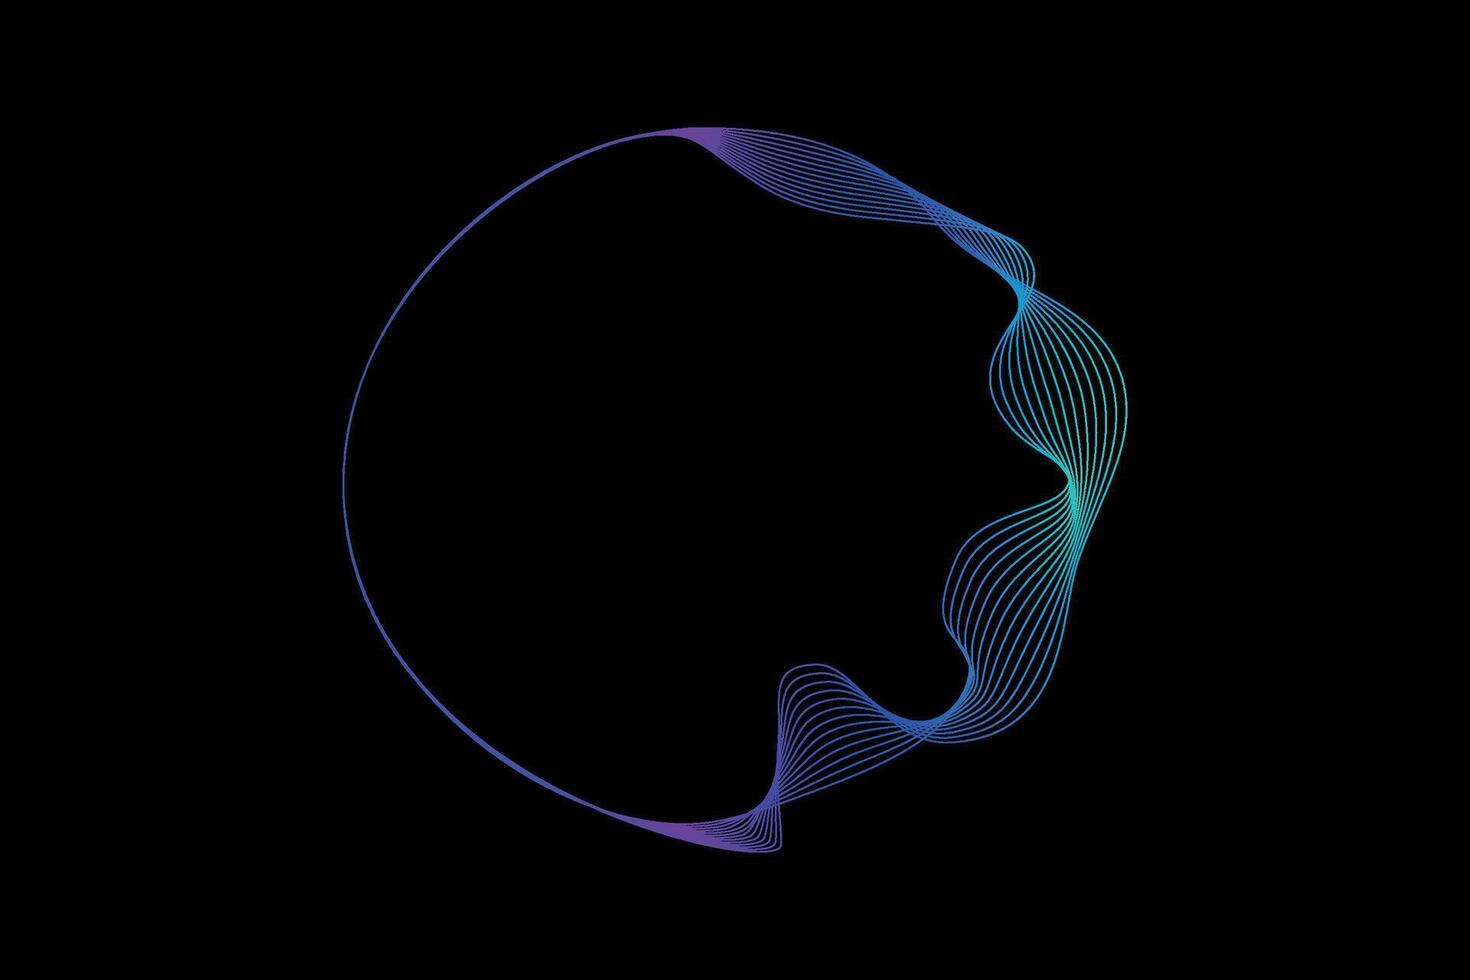 Abstract circle round frame by lines wavy flowing blue green gradient isolated on black background. Vector in concept modern, technology, science, music